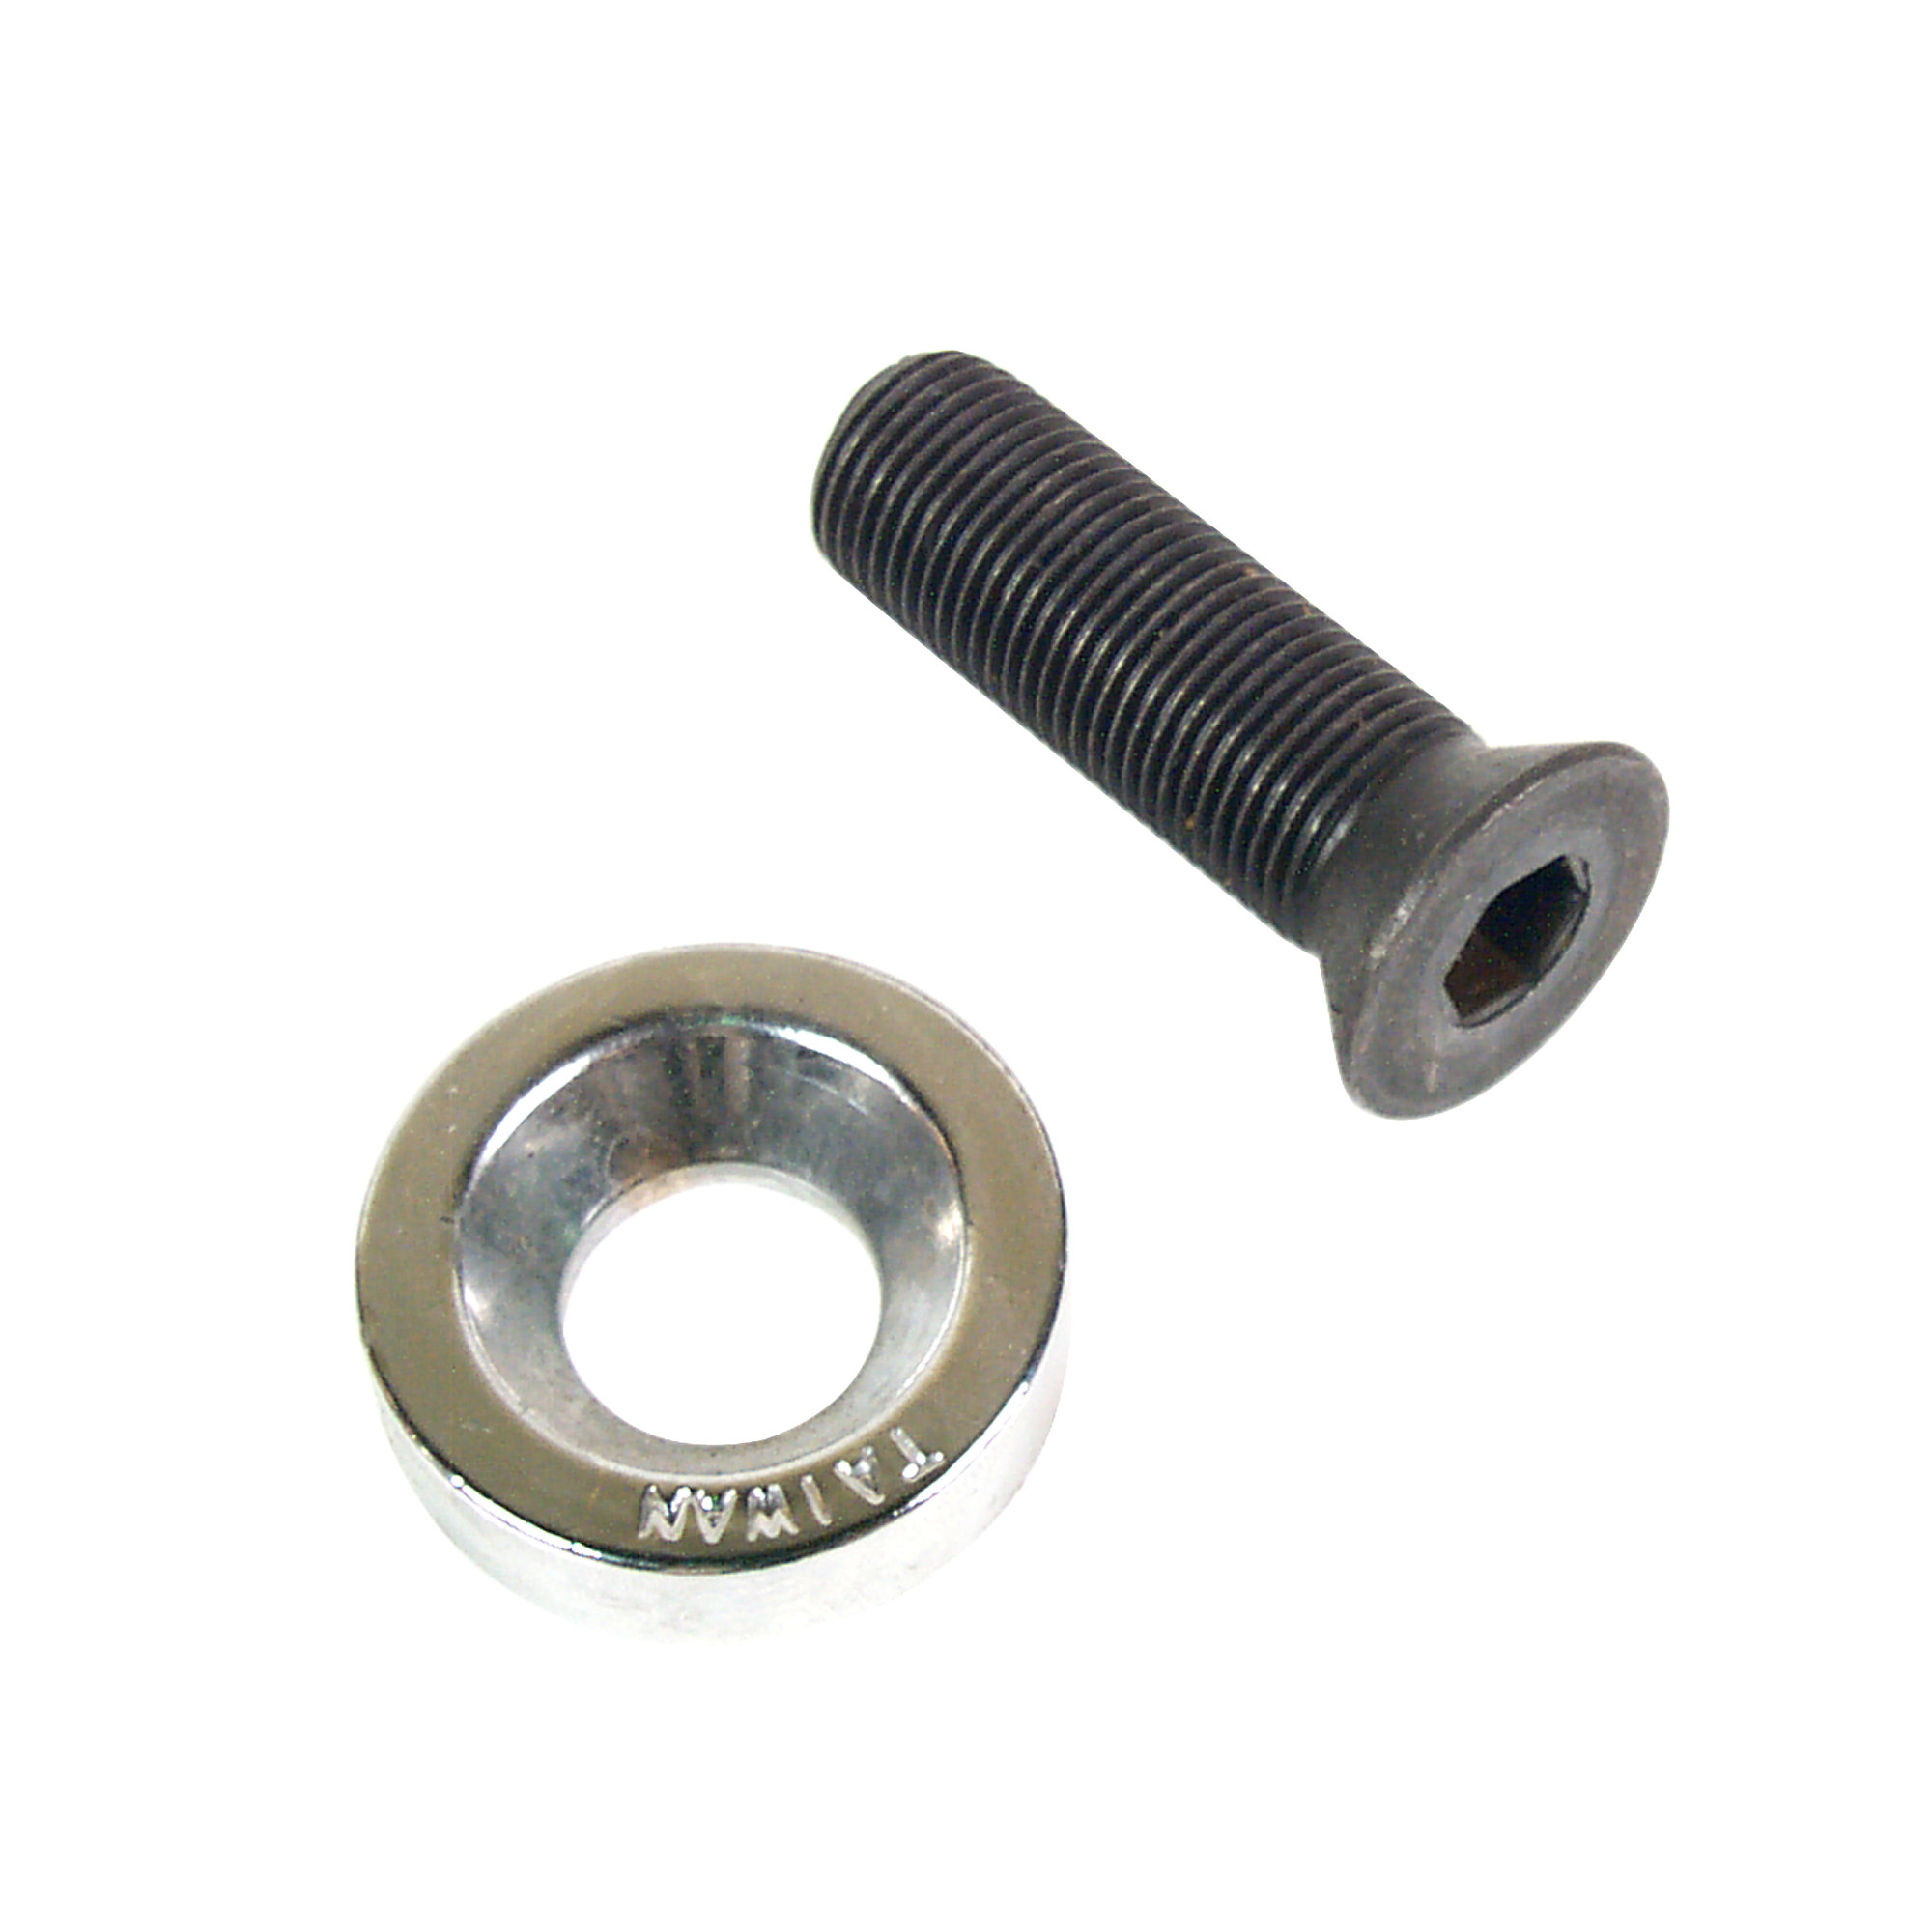 Replacement Bolt and Washer for Dumbbell Handles